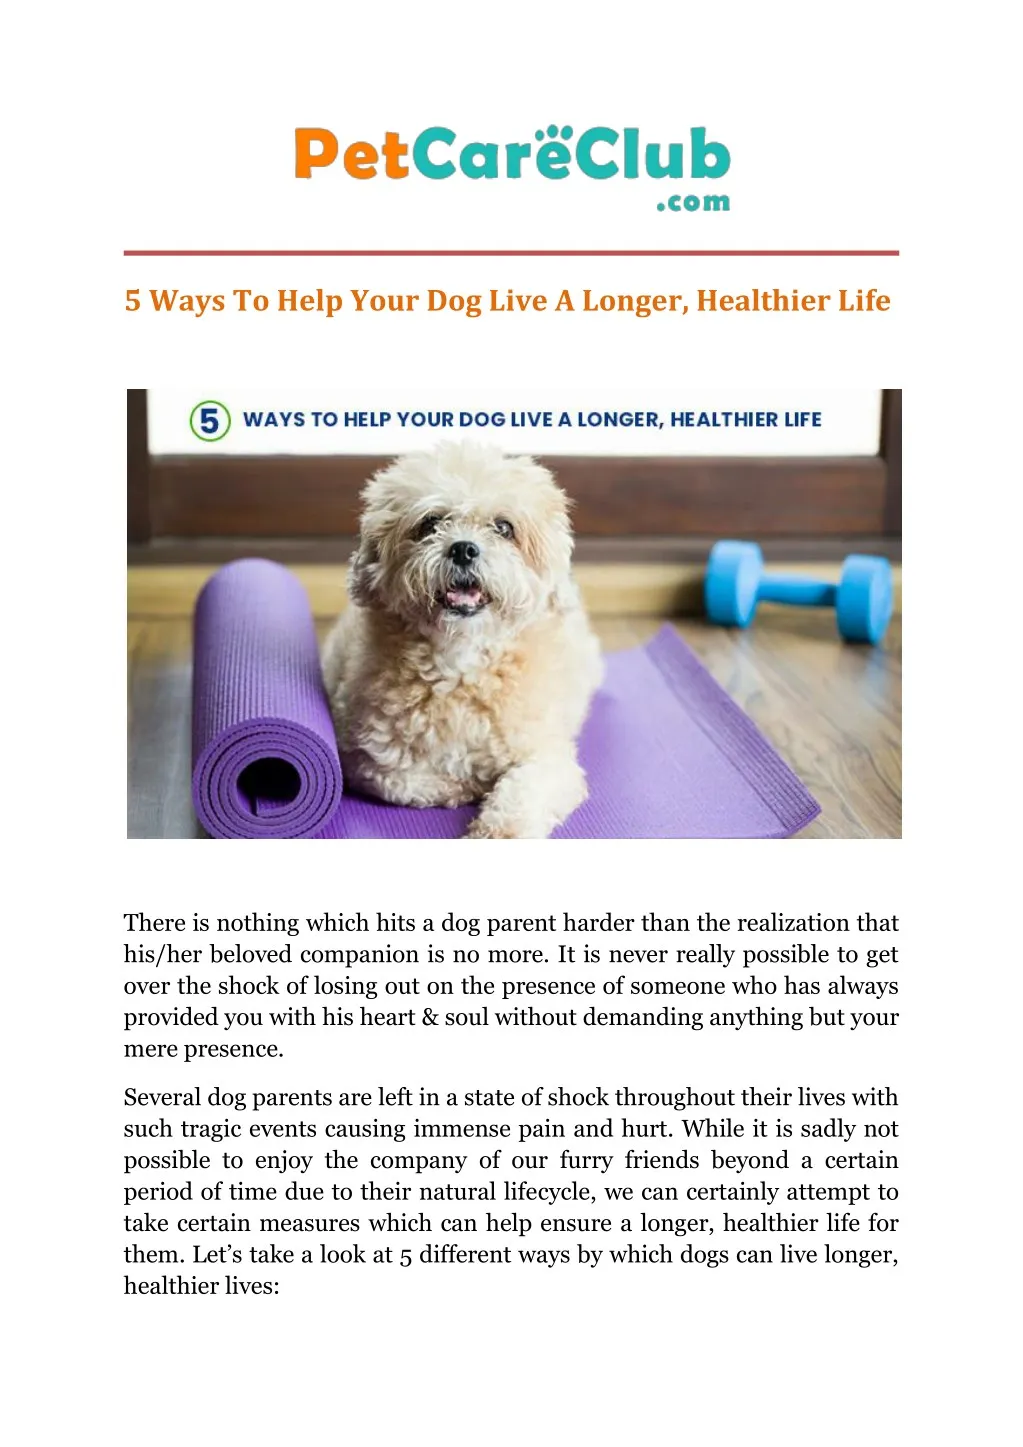 5 ways to help your dog live a longer healthier